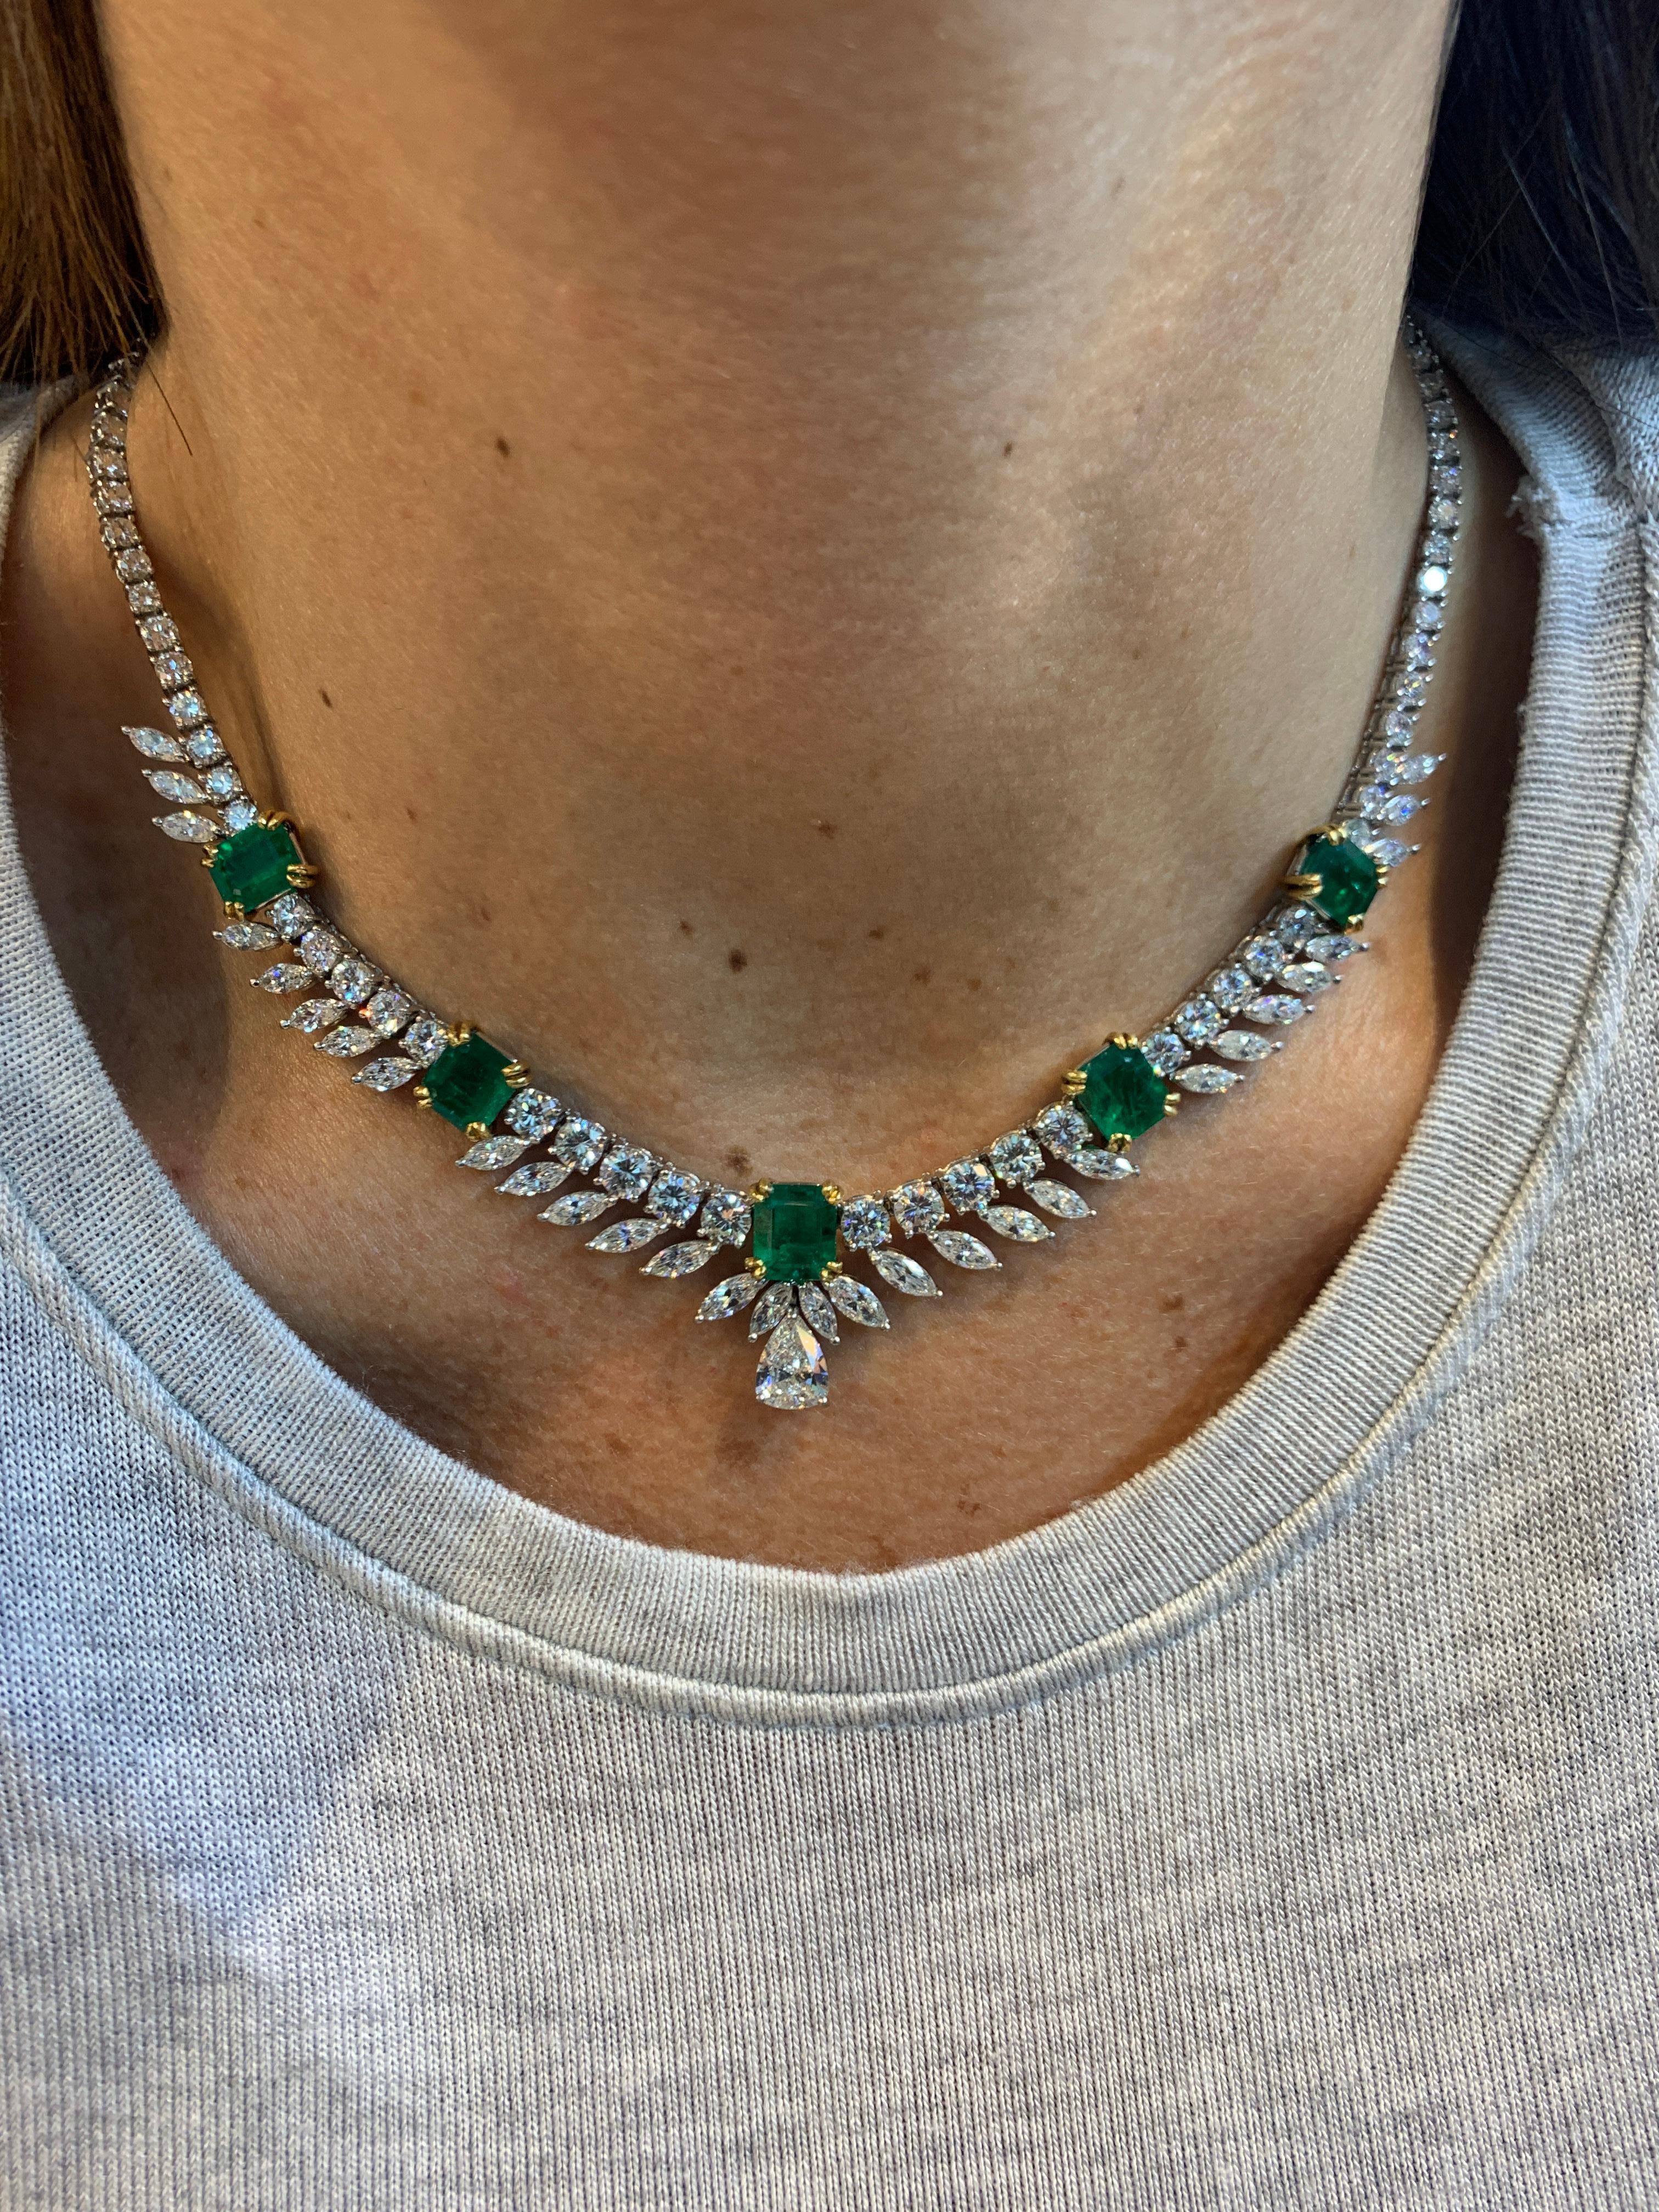 Emerald & Diamond Necklace, marquise round & pear cut diamonds all set in 18K white gold along with 5 emerald cut emeralds
Diamond Weight: approx 18.05 Cts
Emerald Weight: approx 7.50 Cts
Measurements: 15